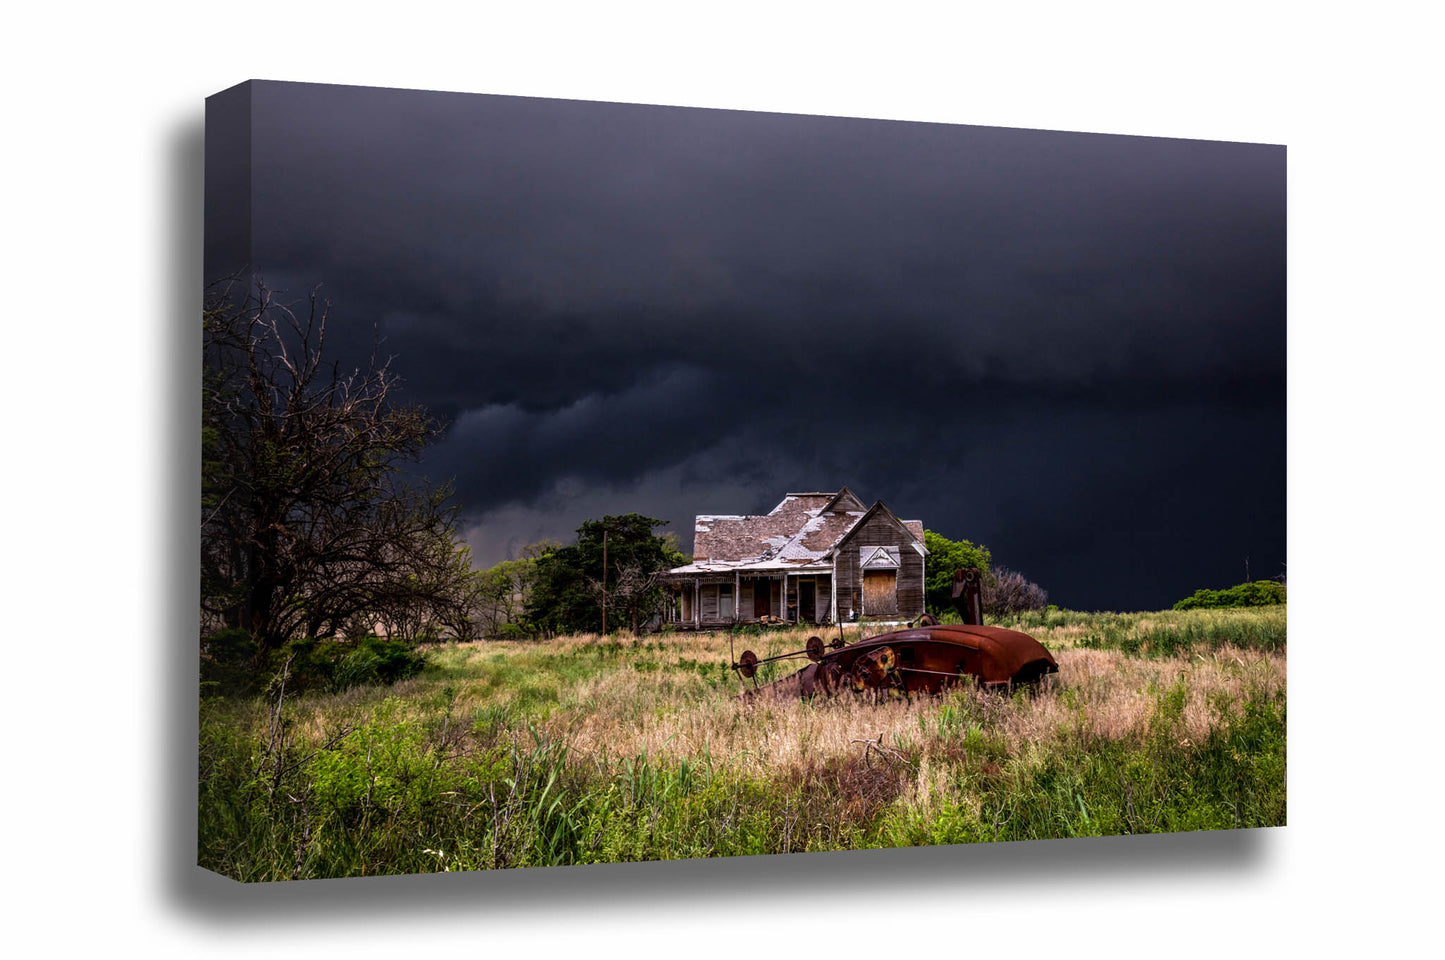 Canvas wall art of an abandoned house and classic cotton gin on a stormy night in Texas by Sean Ramsey of Southern Plains Photography.